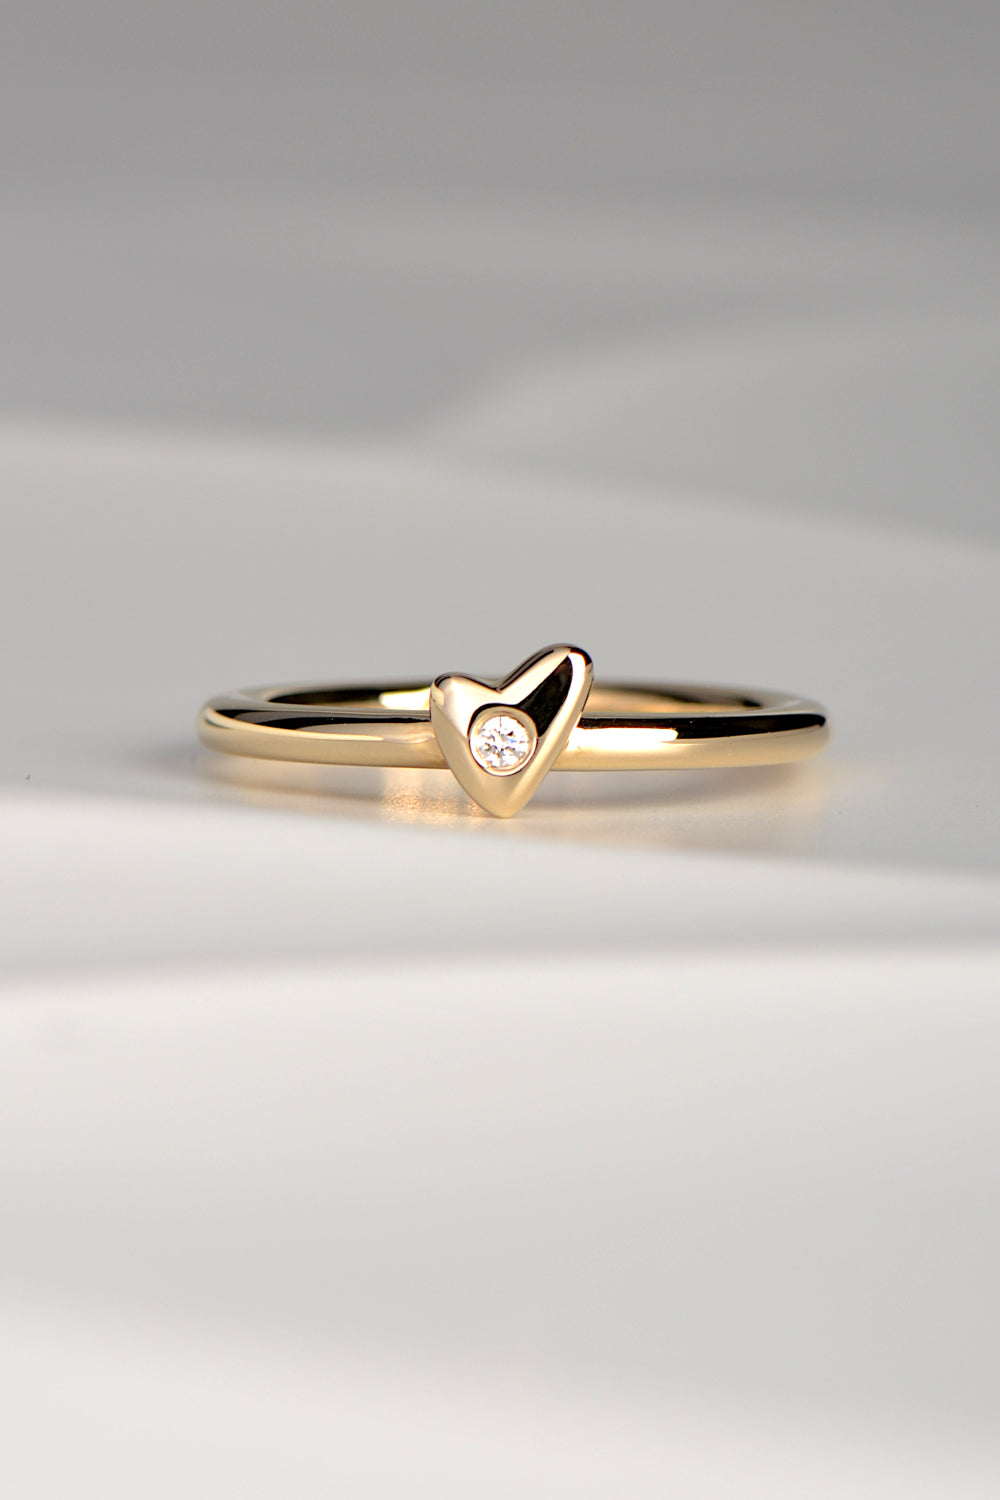 From the heart gold and diamond ring